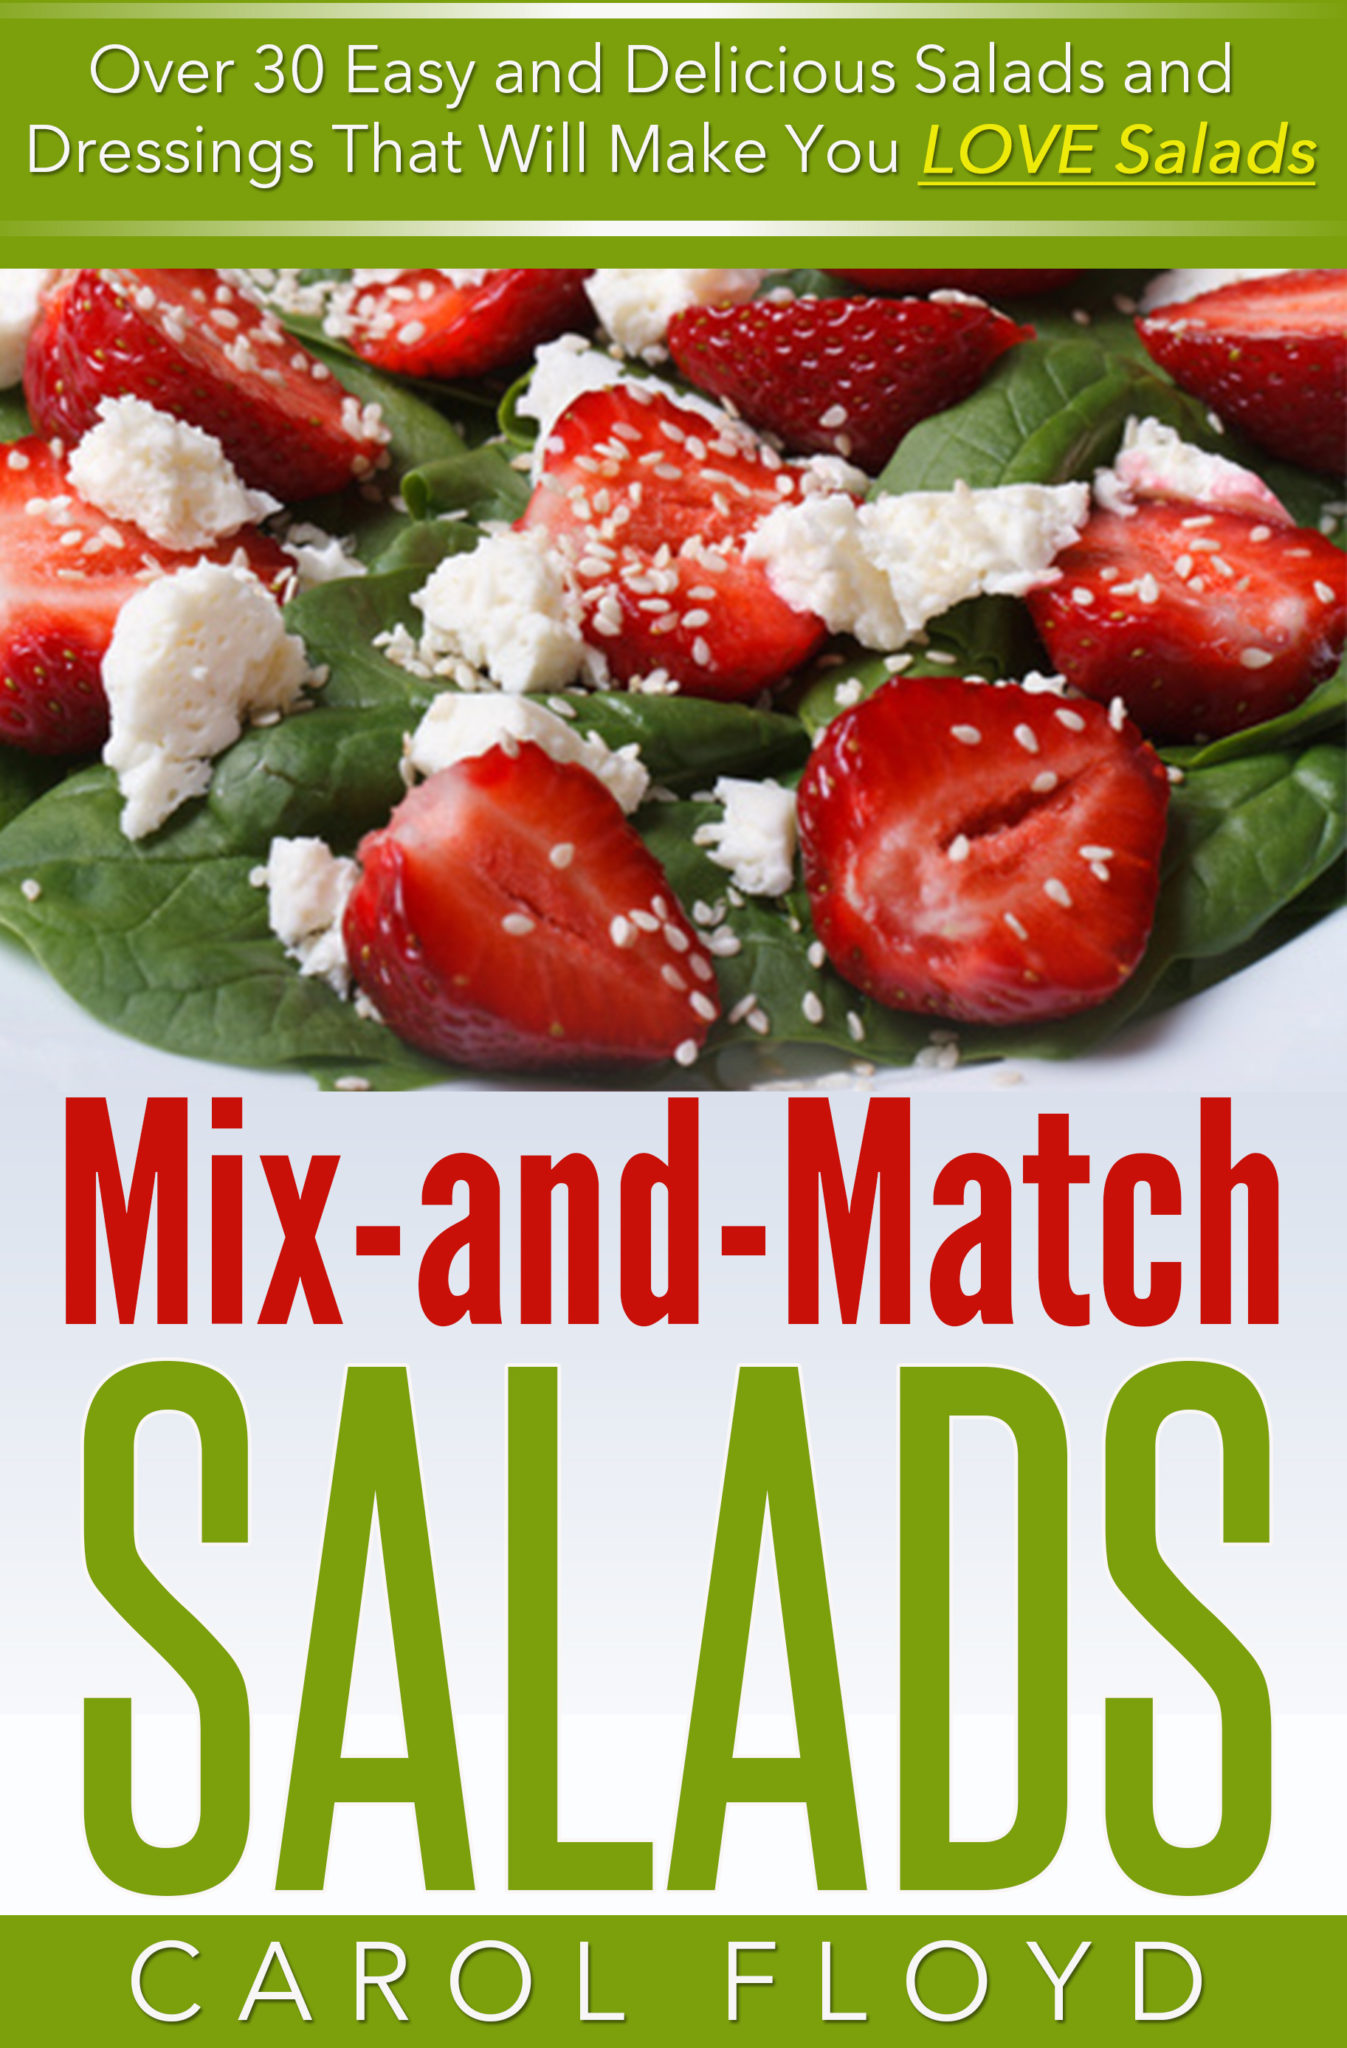 Mix and Match Salads: Over 30 Easy and Delicious Salads and Dressing That Will Make You Love Salads by Carol Floyd by Carol Floyd